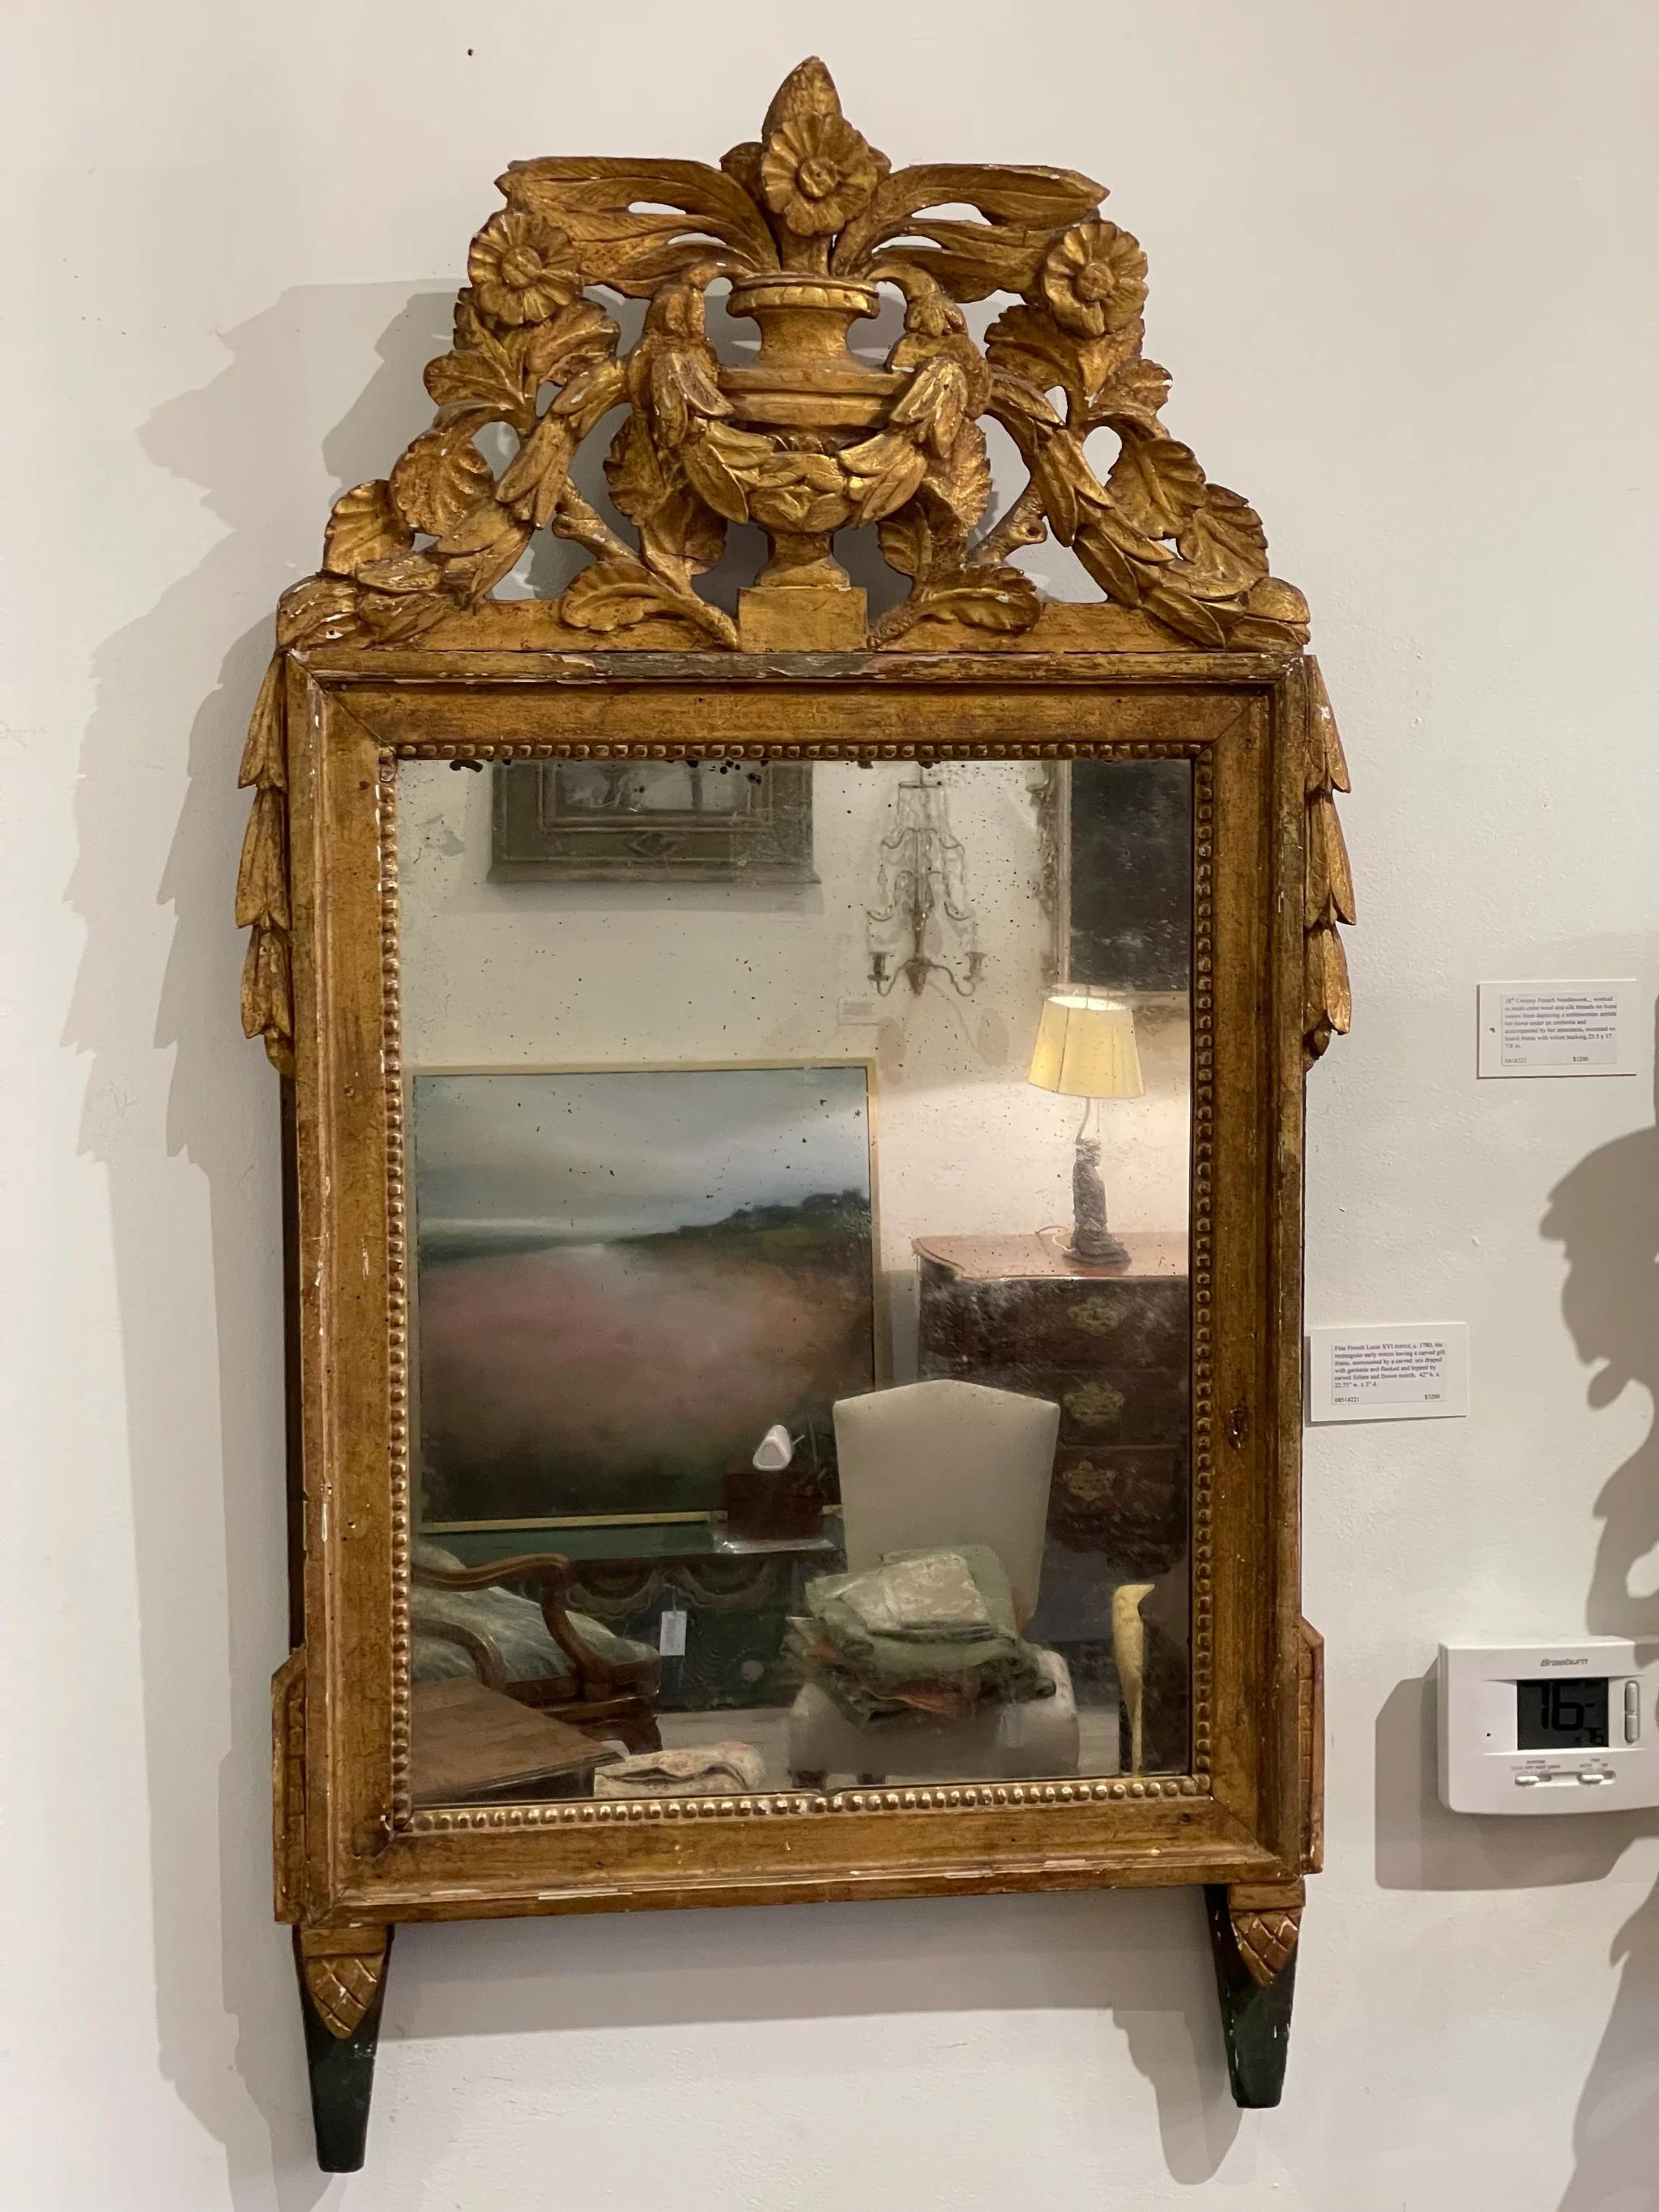 Fine French Louis XVI mirror, c. 1780, the rectangular early mirror having a carved gilt frame, surmounted by a carved urn draped with garlands and flanked and topped by carved foliate and flower motifs. Measures: 42” H x 22.75” W x 3” D.

